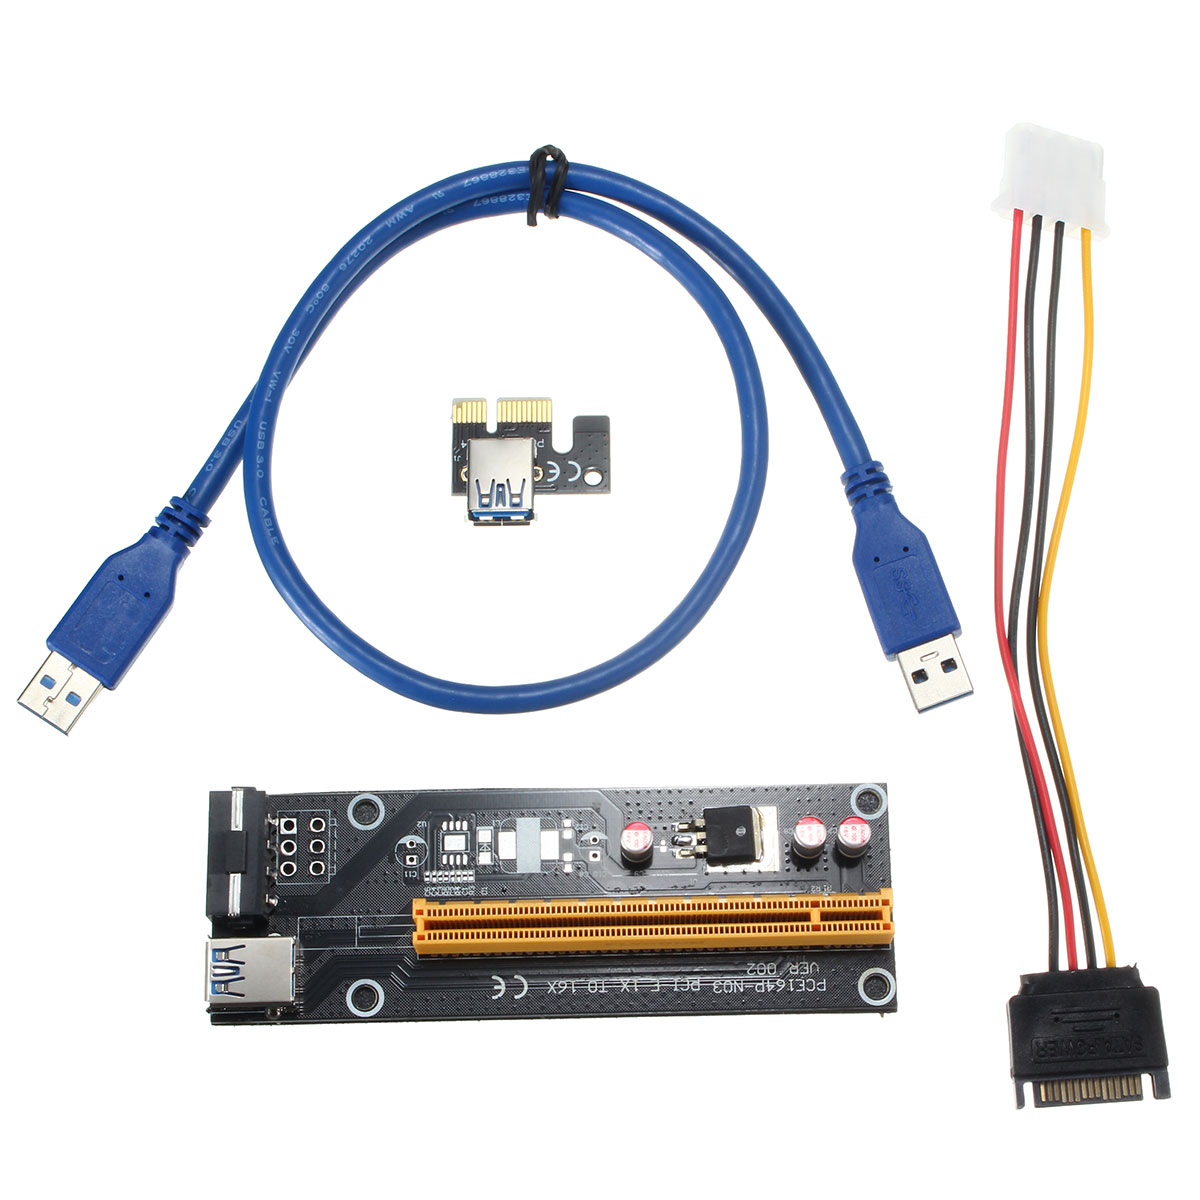 

PCI-E 1x to 16x Graphics Extension Cable Extender Riser Card Adapter Mining Dedicated USB 3.0